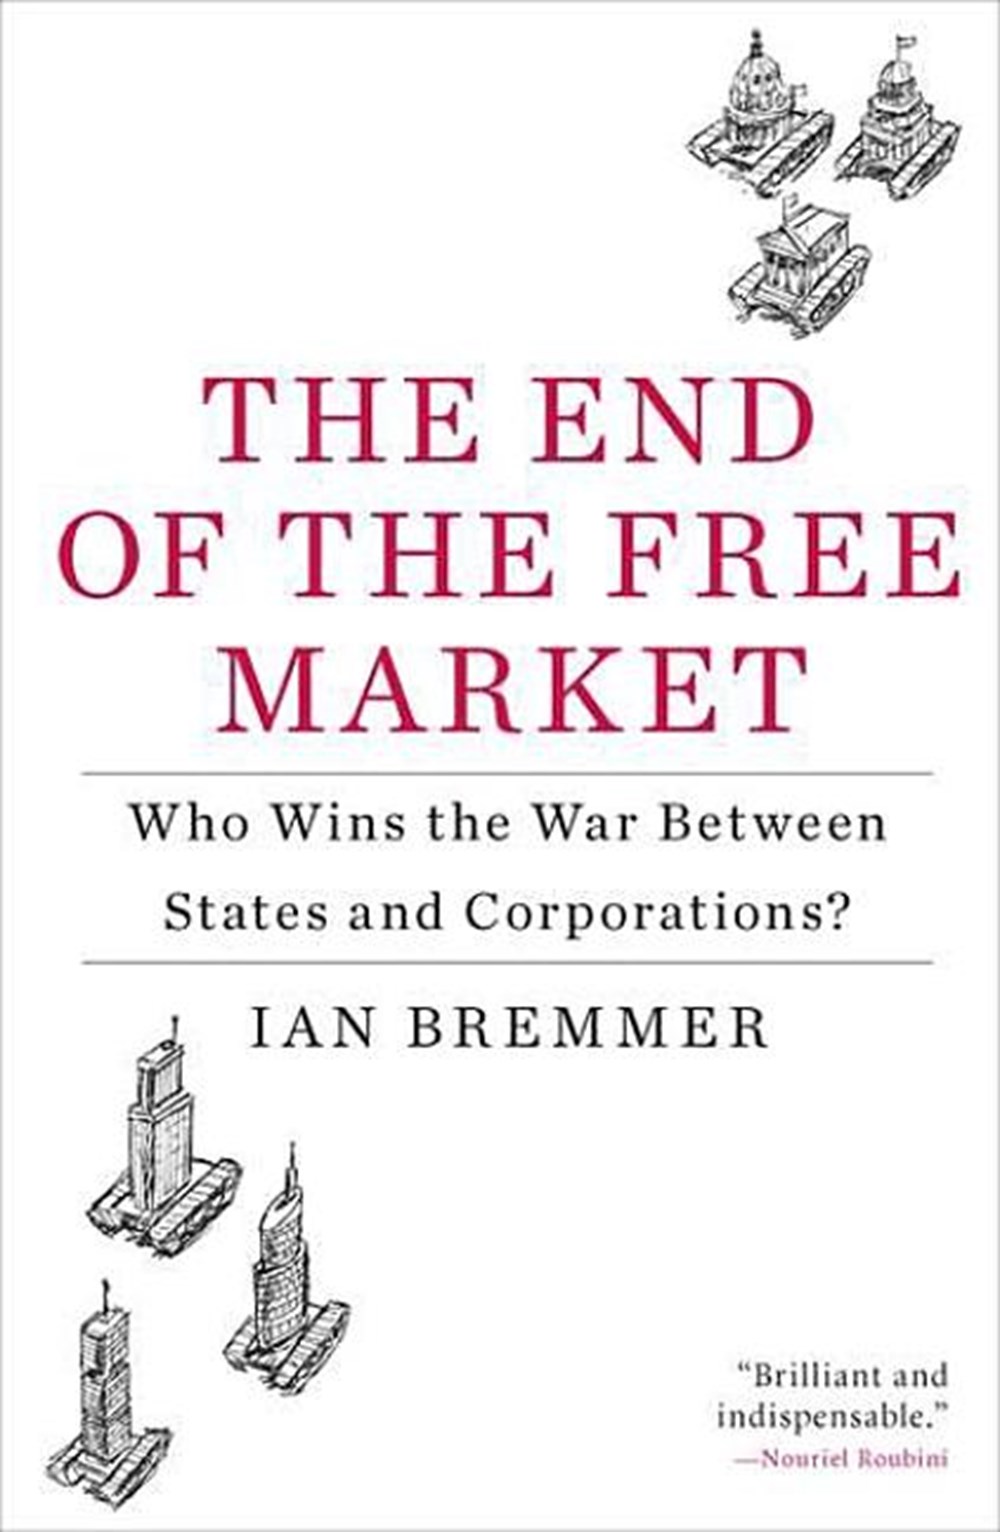 End of the Free Market Who Wins the War Between States and Corporations?